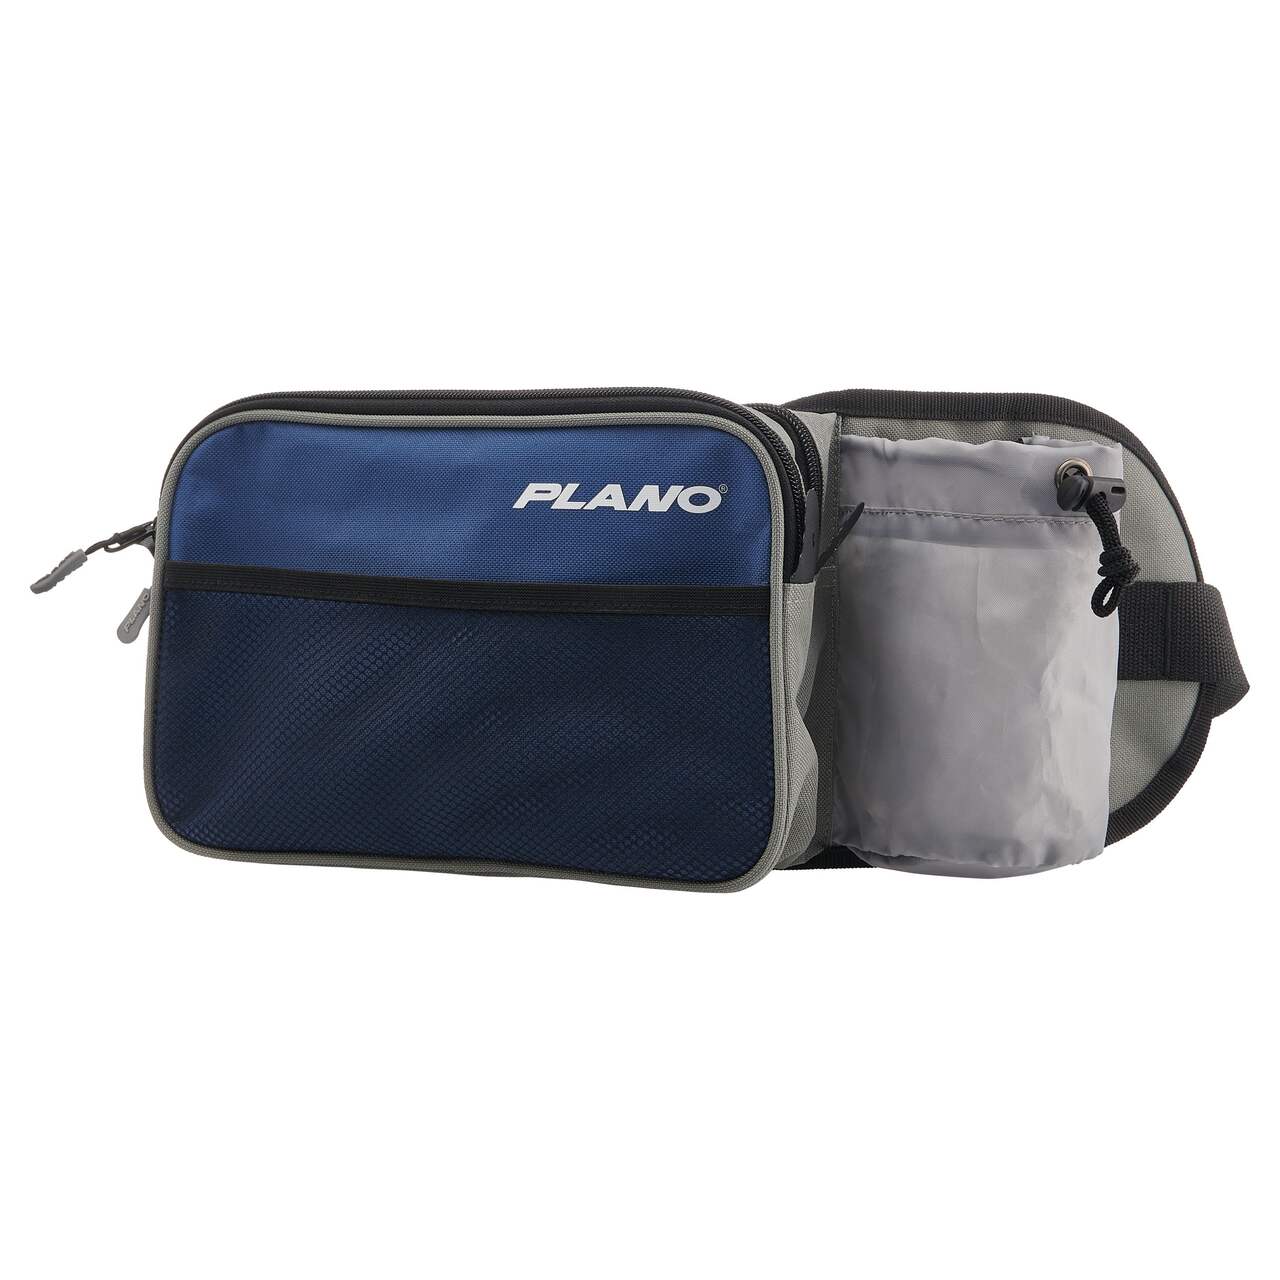 https://media-www.canadiantire.ca/product/playing/fishing/fishing-accessories/0772980/plano-tackle-waist-pack-blue-3273b1f7-39e8-446d-88dc-0b2510ca5c48-jpgrendition.jpg?imdensity=1&imwidth=1244&impolicy=mZoom